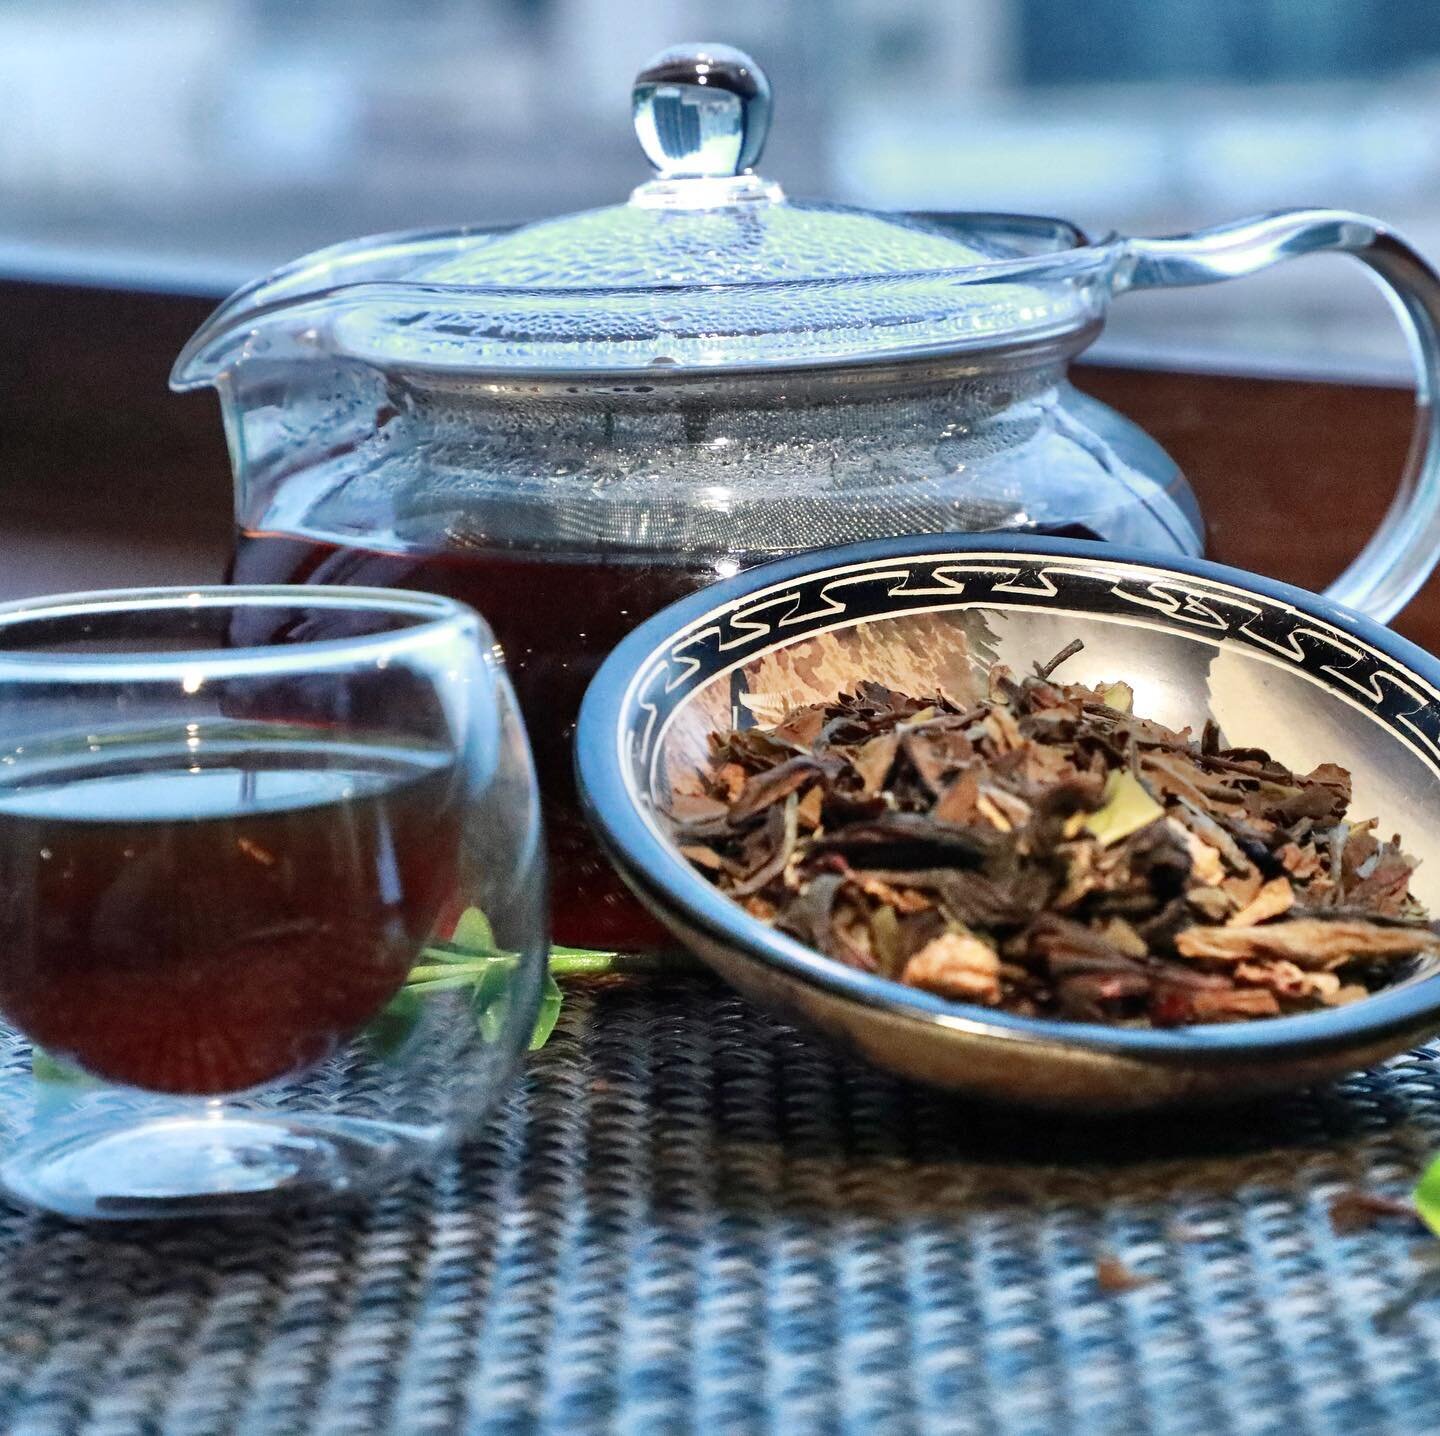 Perfect afternoon tea from Malawi 🇲🇼 We have two premium selections for you to choose, white tea hibiscus passion and peach or Satemwa black earl grey 😋 #africantea #specialtytea #afternoonteatime #weekendvibes #dogooddrinkgreat